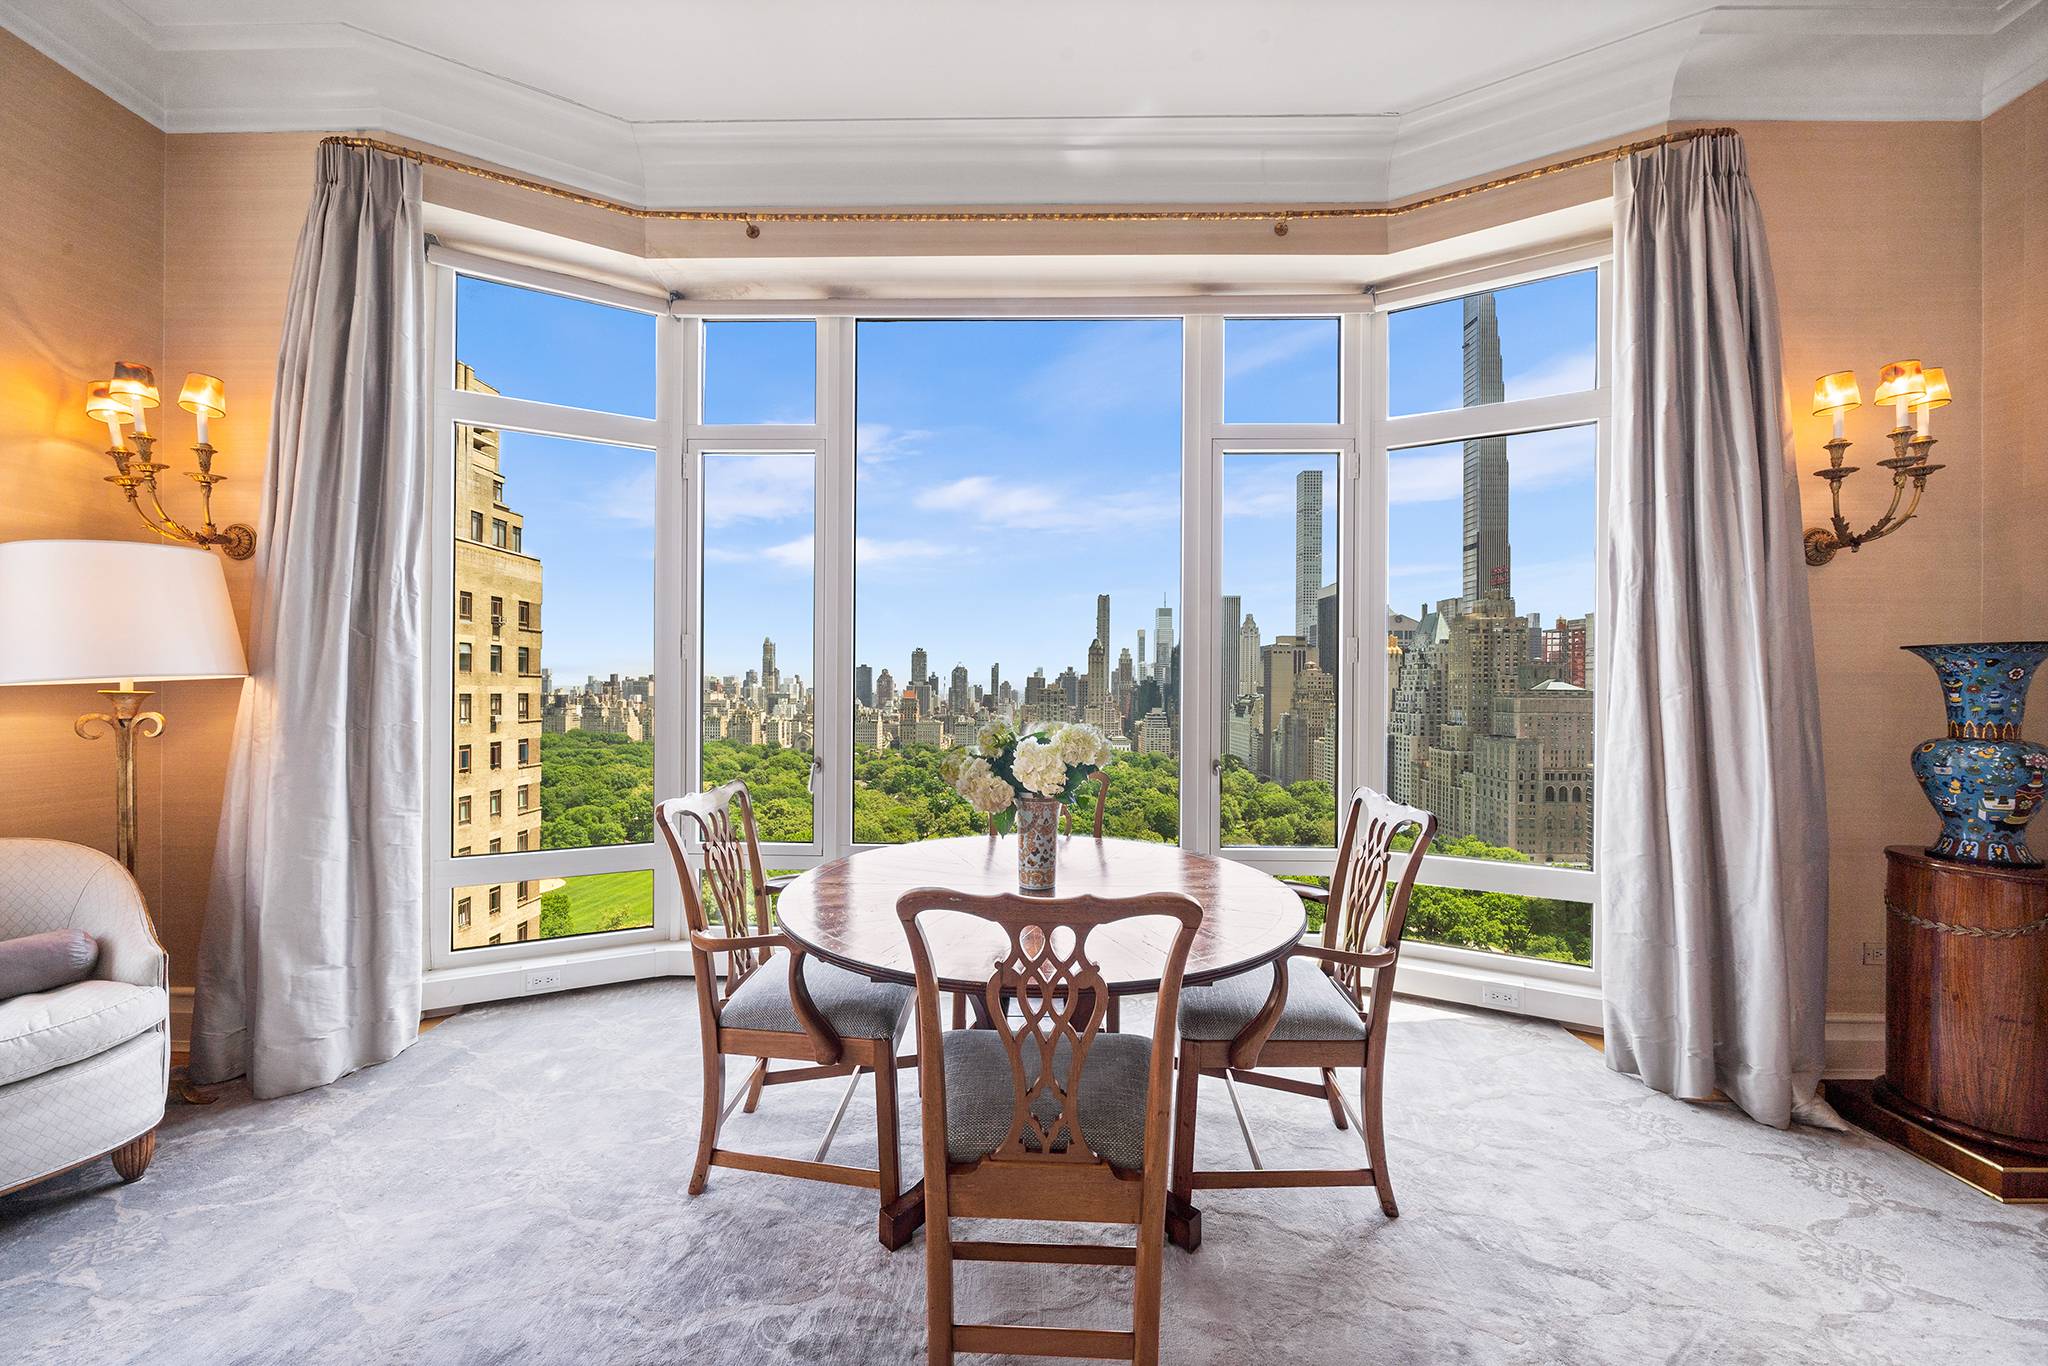 In the rarefied air of the 27th floor, where the city s relentless pulse softens into a distant hum, apartment 27D at 15 Central Park West reveals itself a seldom ...